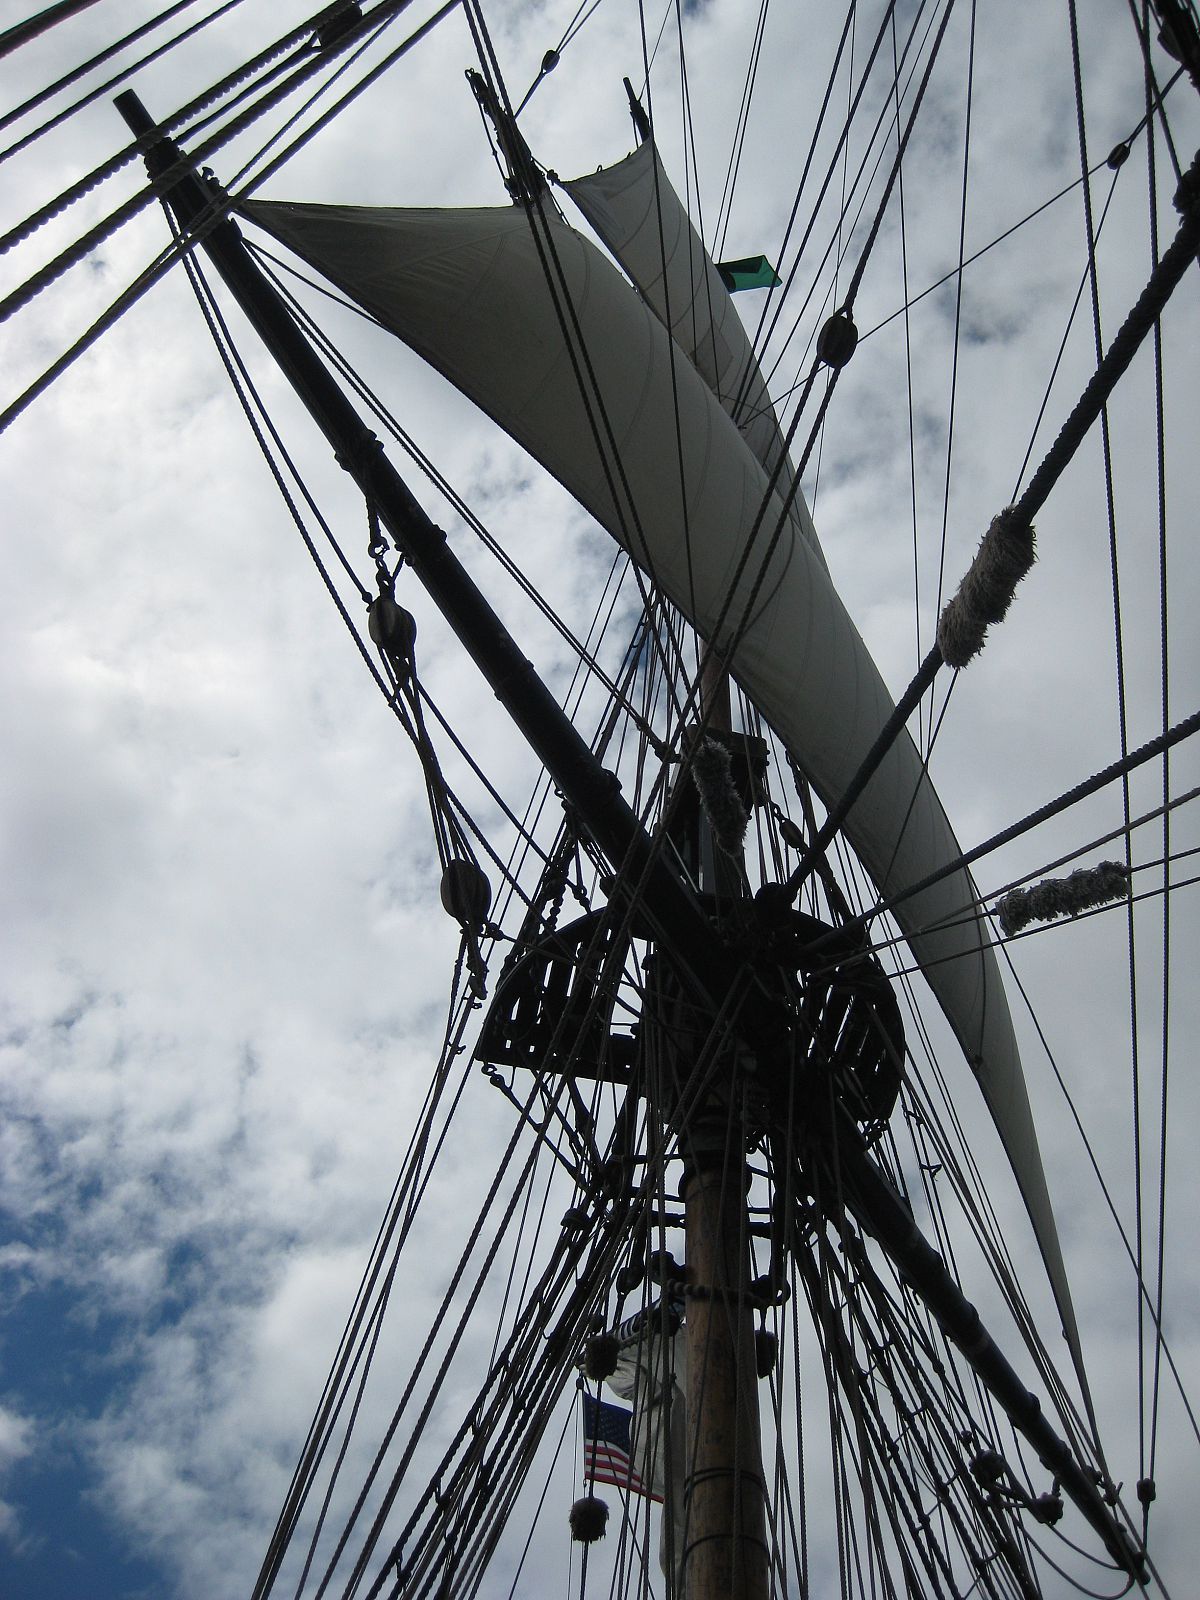 More rigging - from the Battle Sail May 2013 photo gallery.